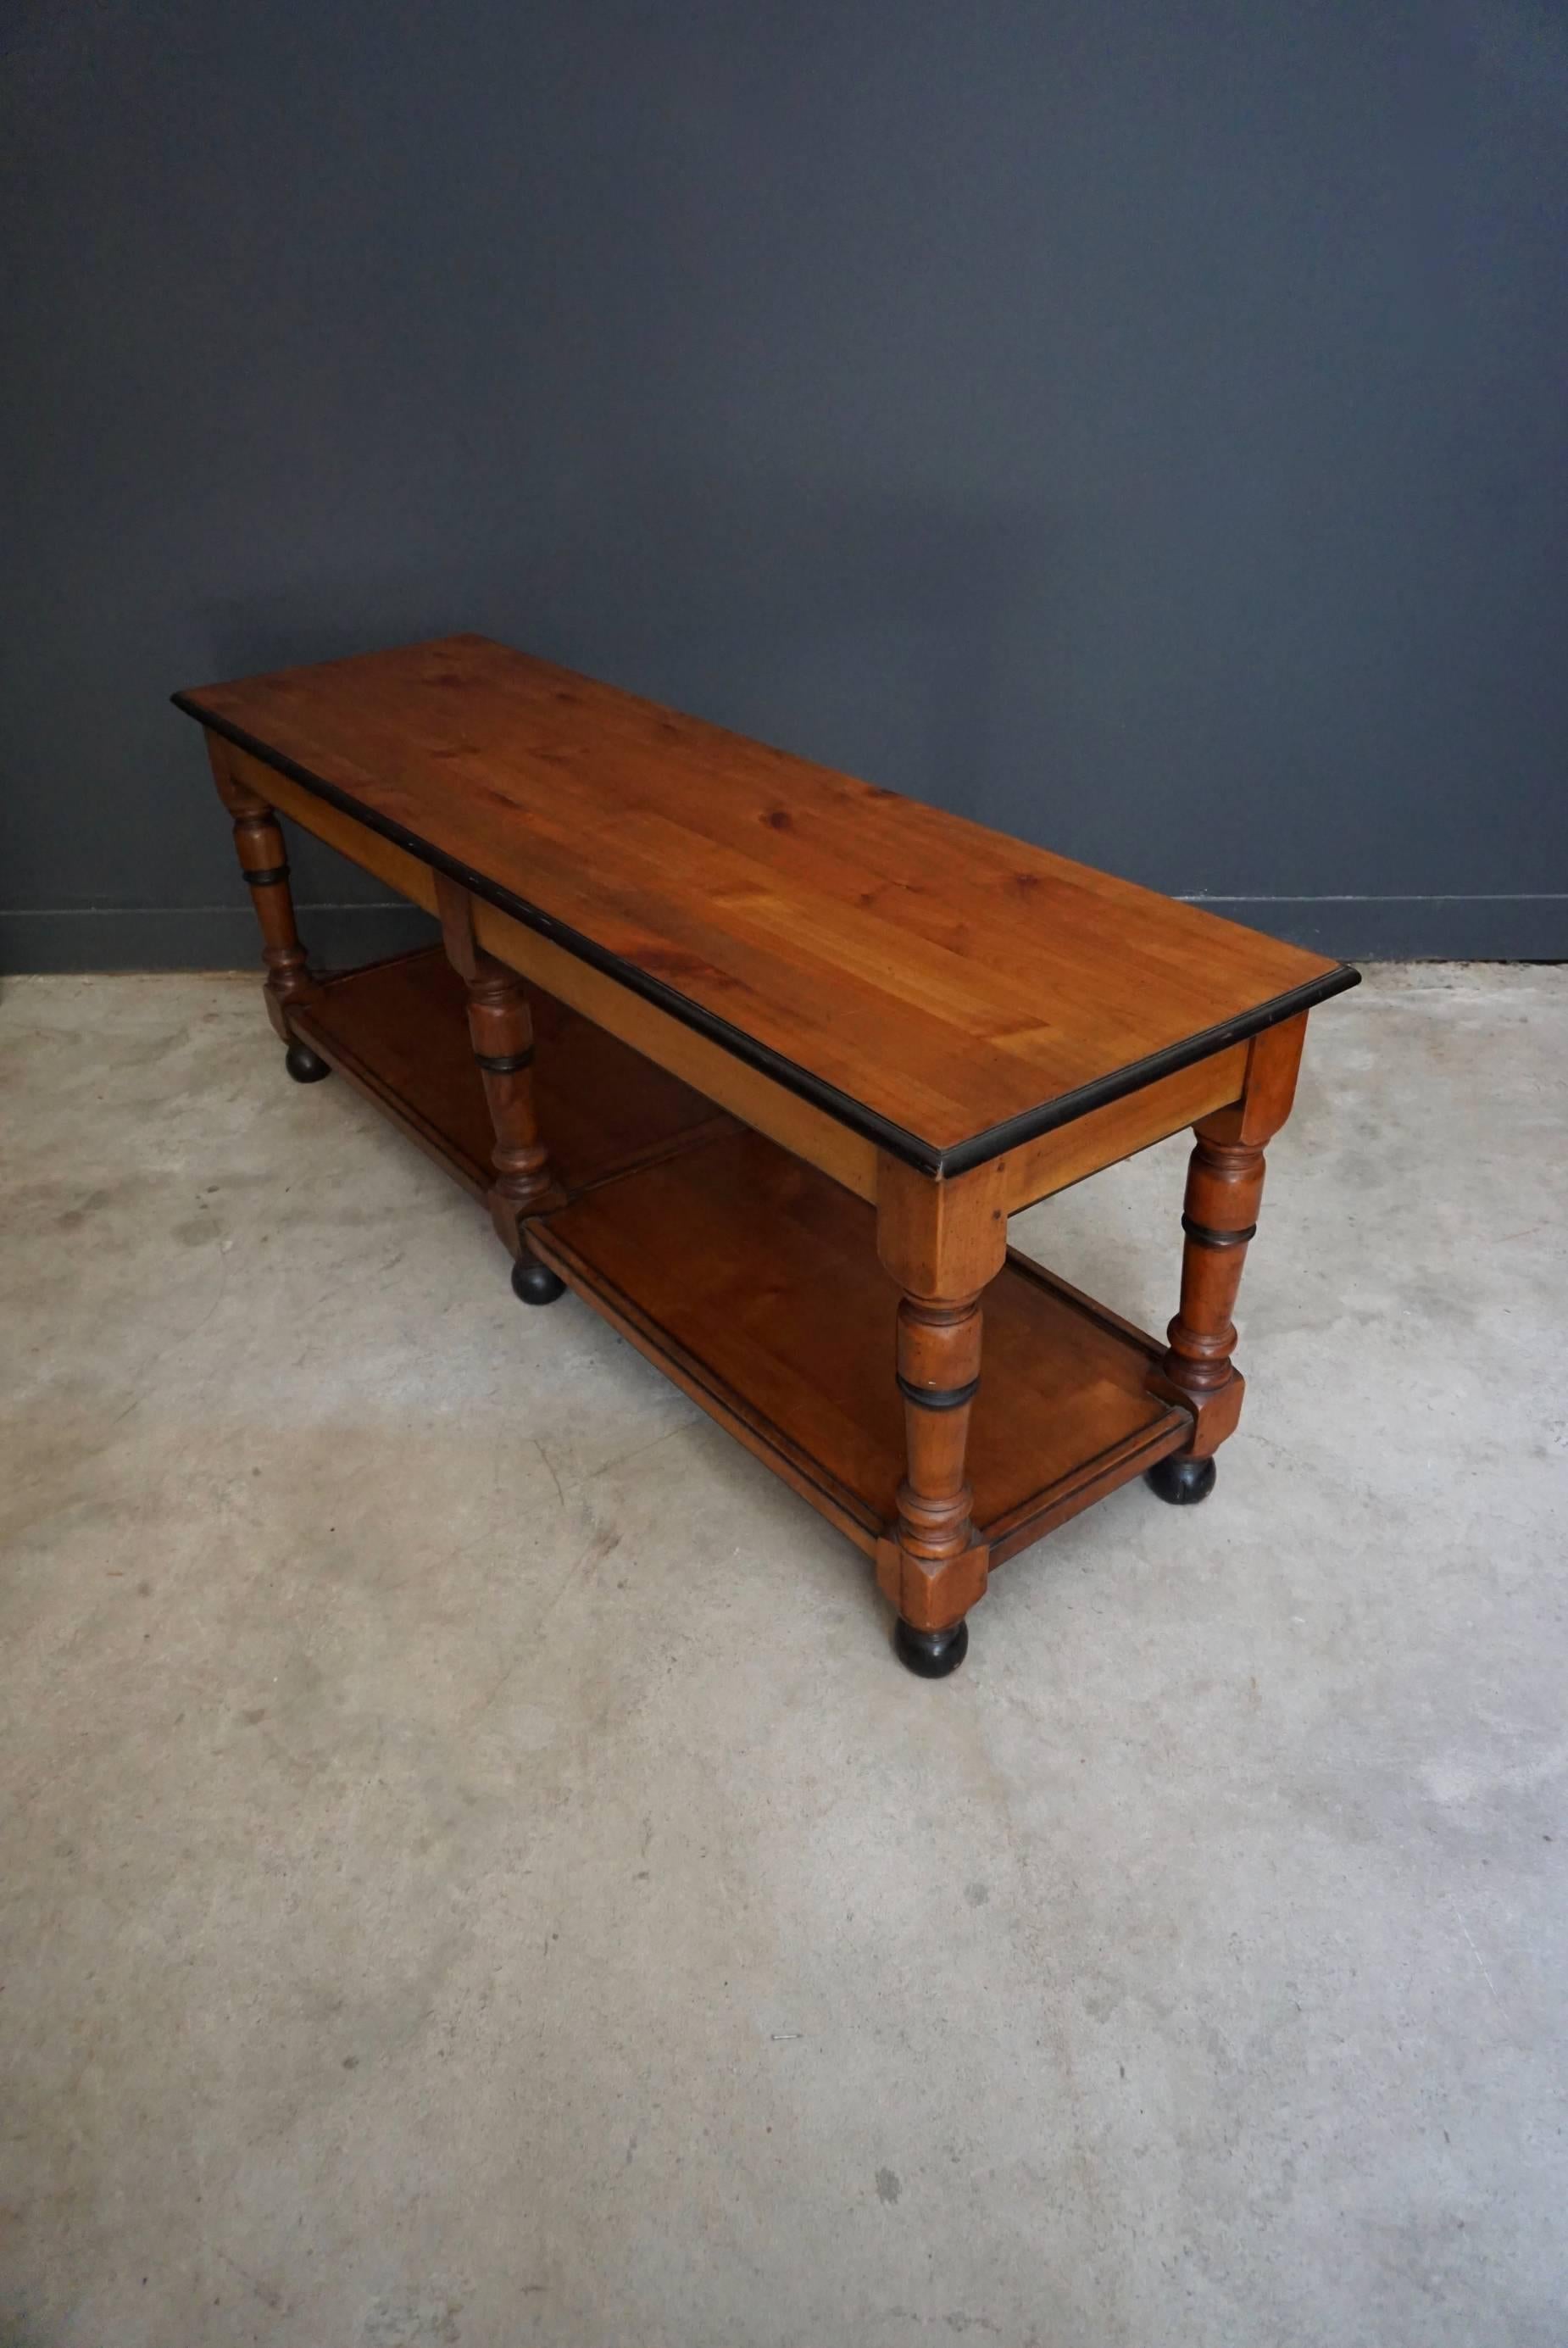 This French console table was designed and made around the late 19th century from solid cherry wood. It remains in a very good condition. It can be used as a display table in a shop or as a side table.